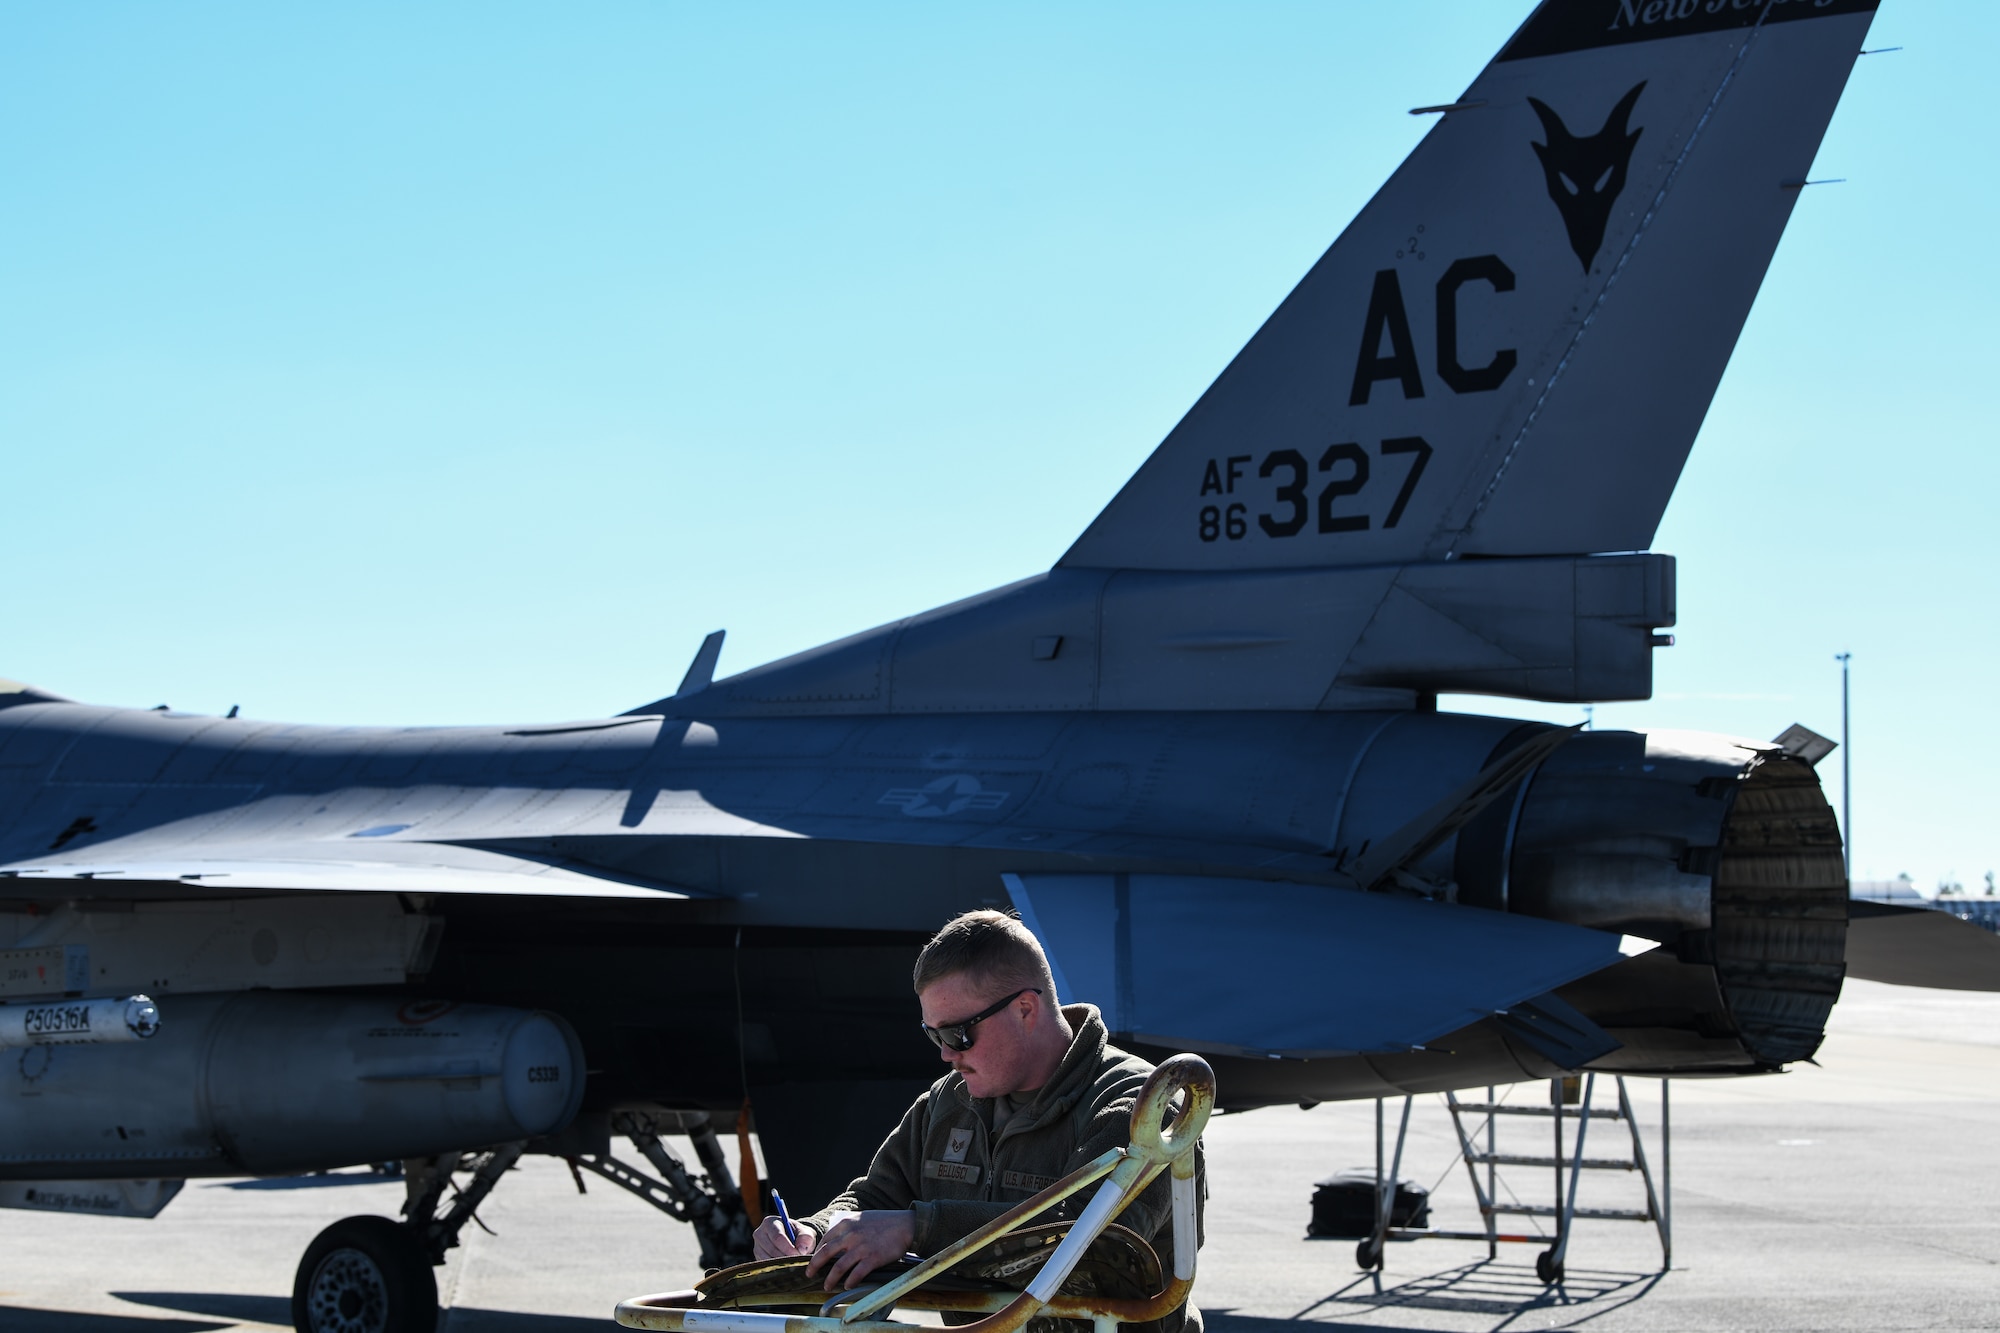 An image of U.S. Air Force Staff Sgt. Mario Bellusci, Jr., crew chief with the 177th Fighter Wing of the New Jersey Air National Guard, updating maintenance documents in between F-16 sorties at Tyndall Air Force Base, Fla.